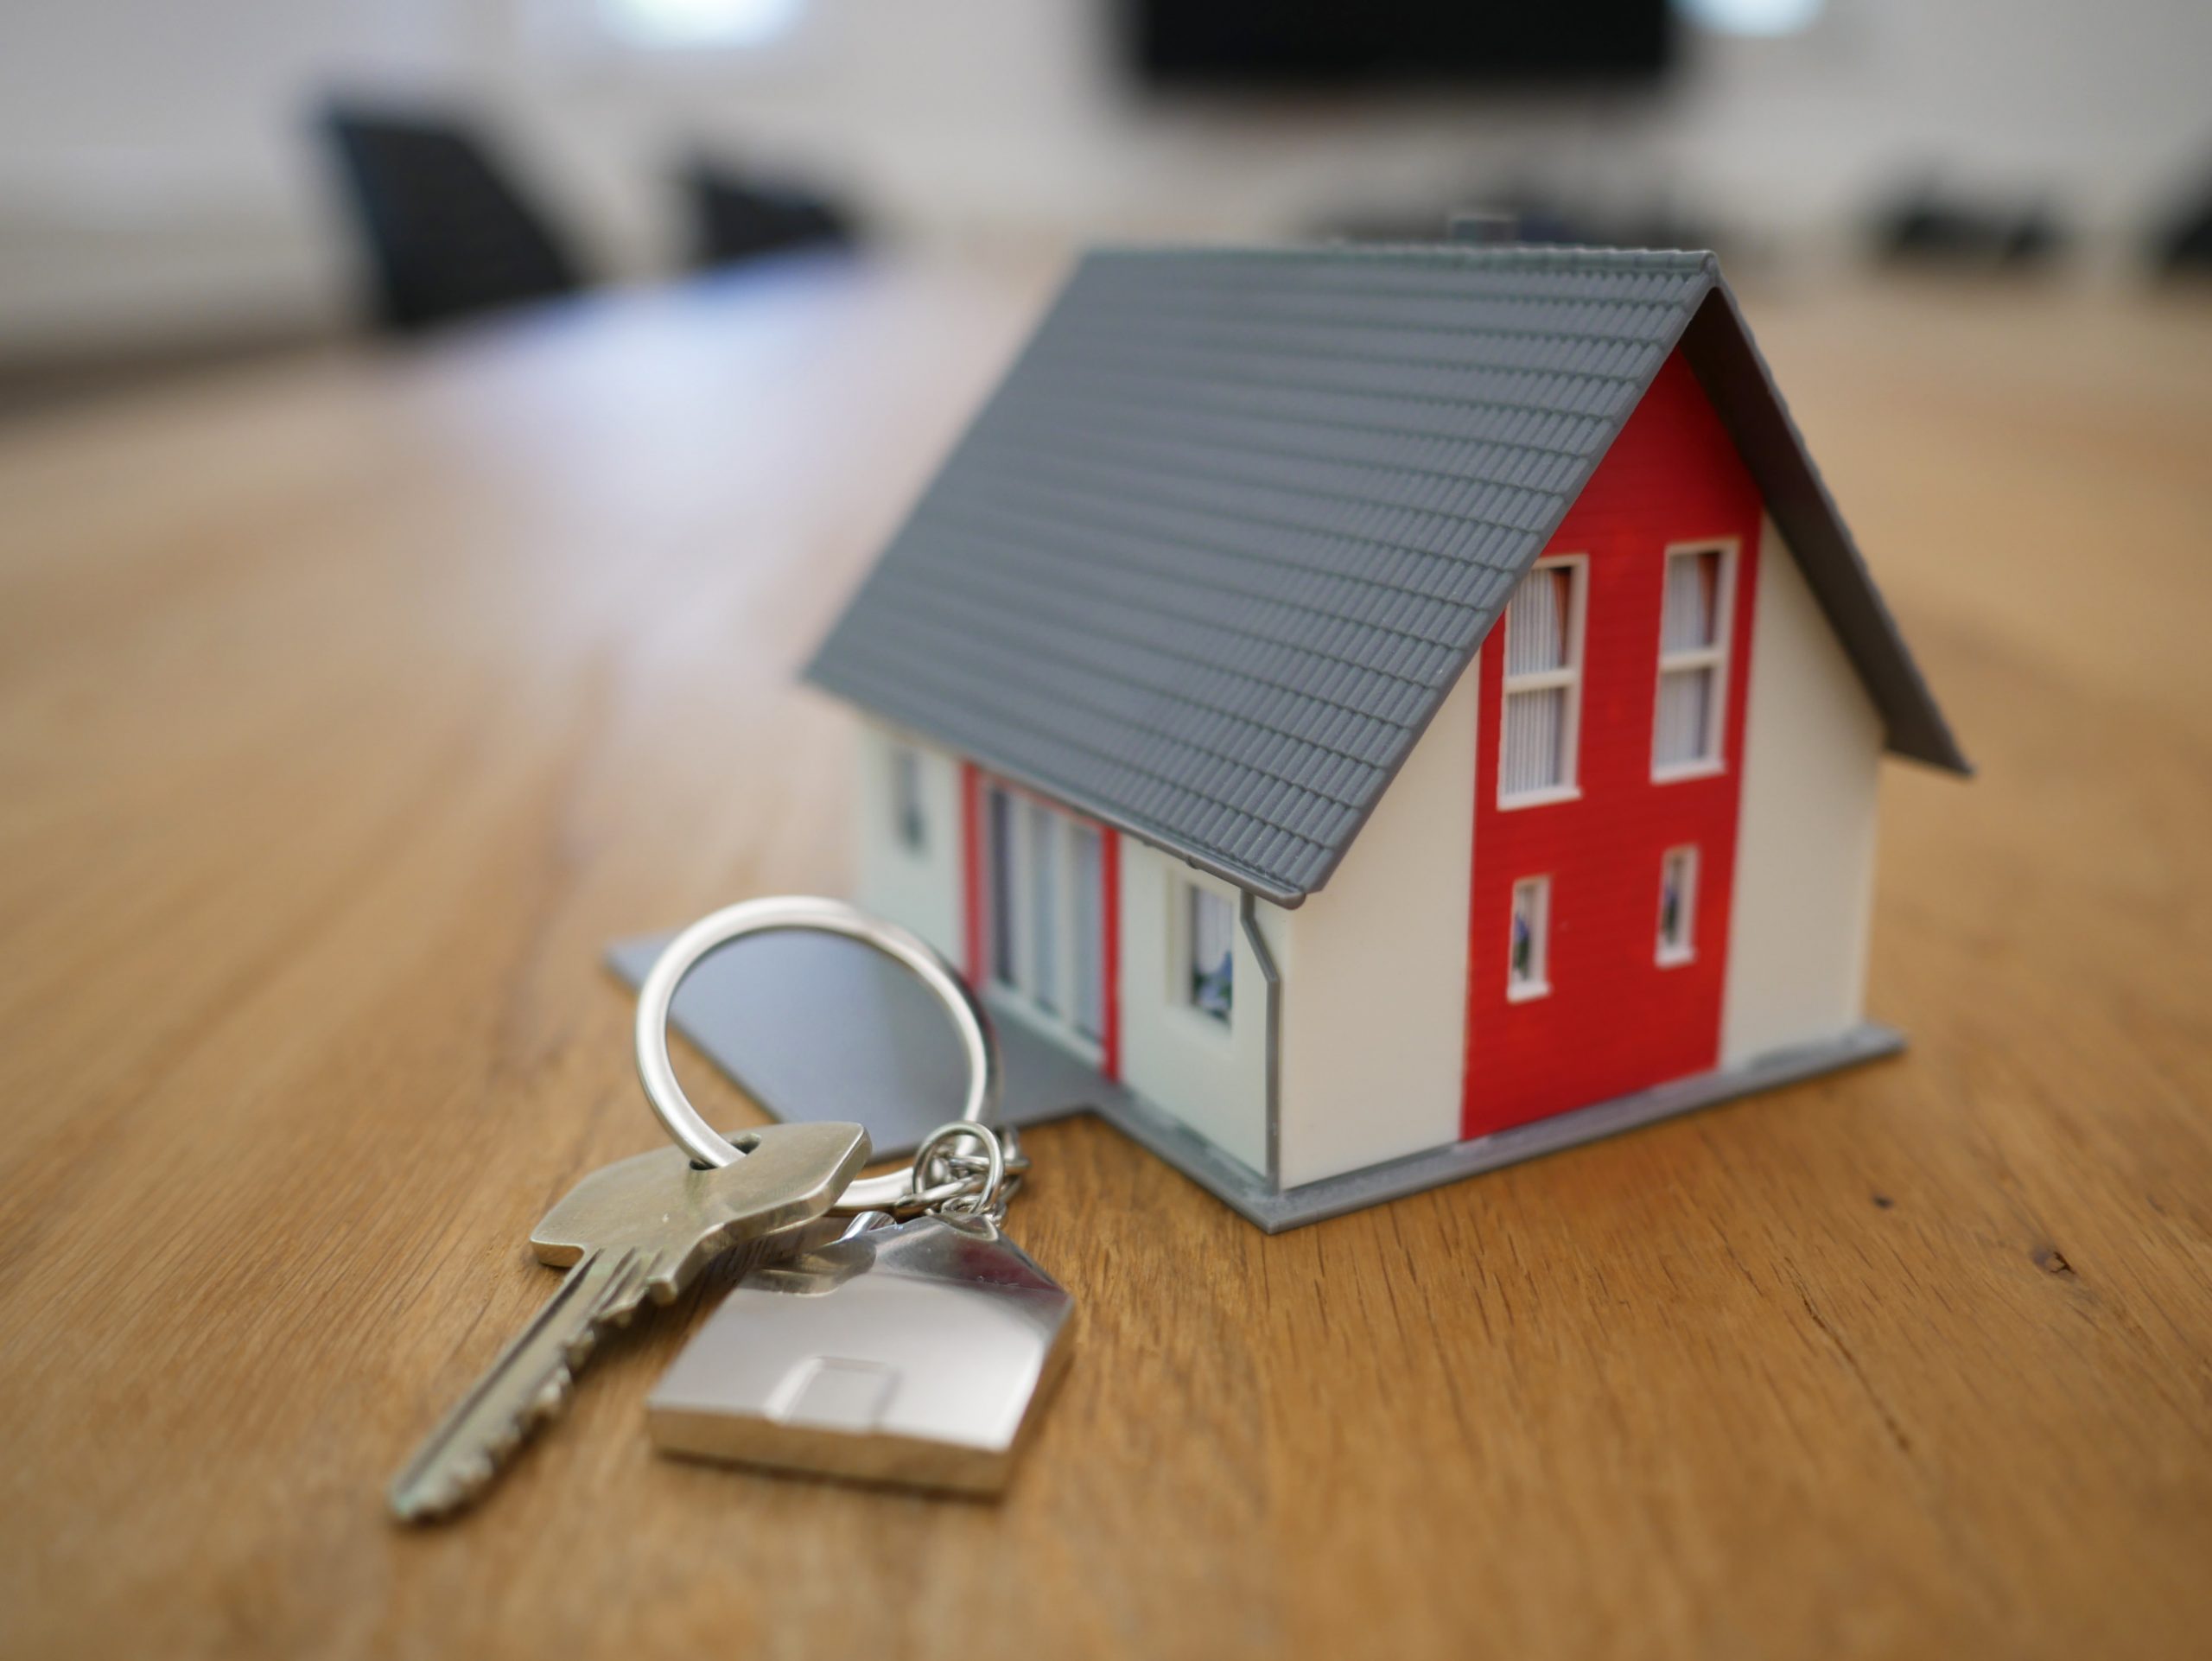 A small model of a house next to a set of keys in a showroom office.